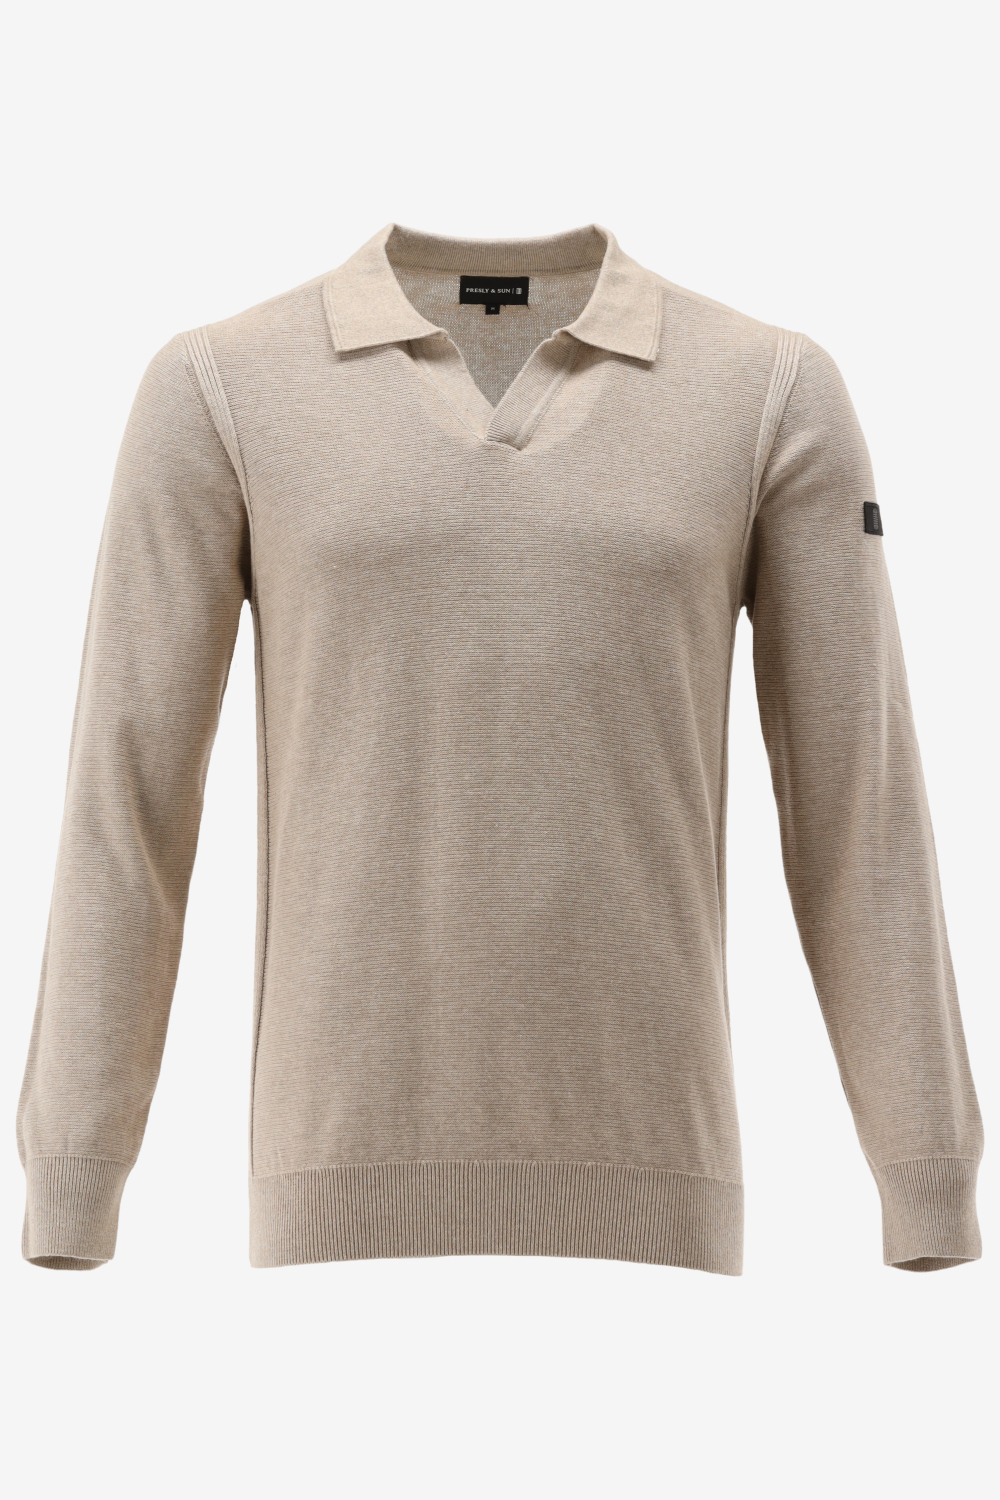 Presly & Sun - Heren open polo ribbed - Charles - Taupe - S